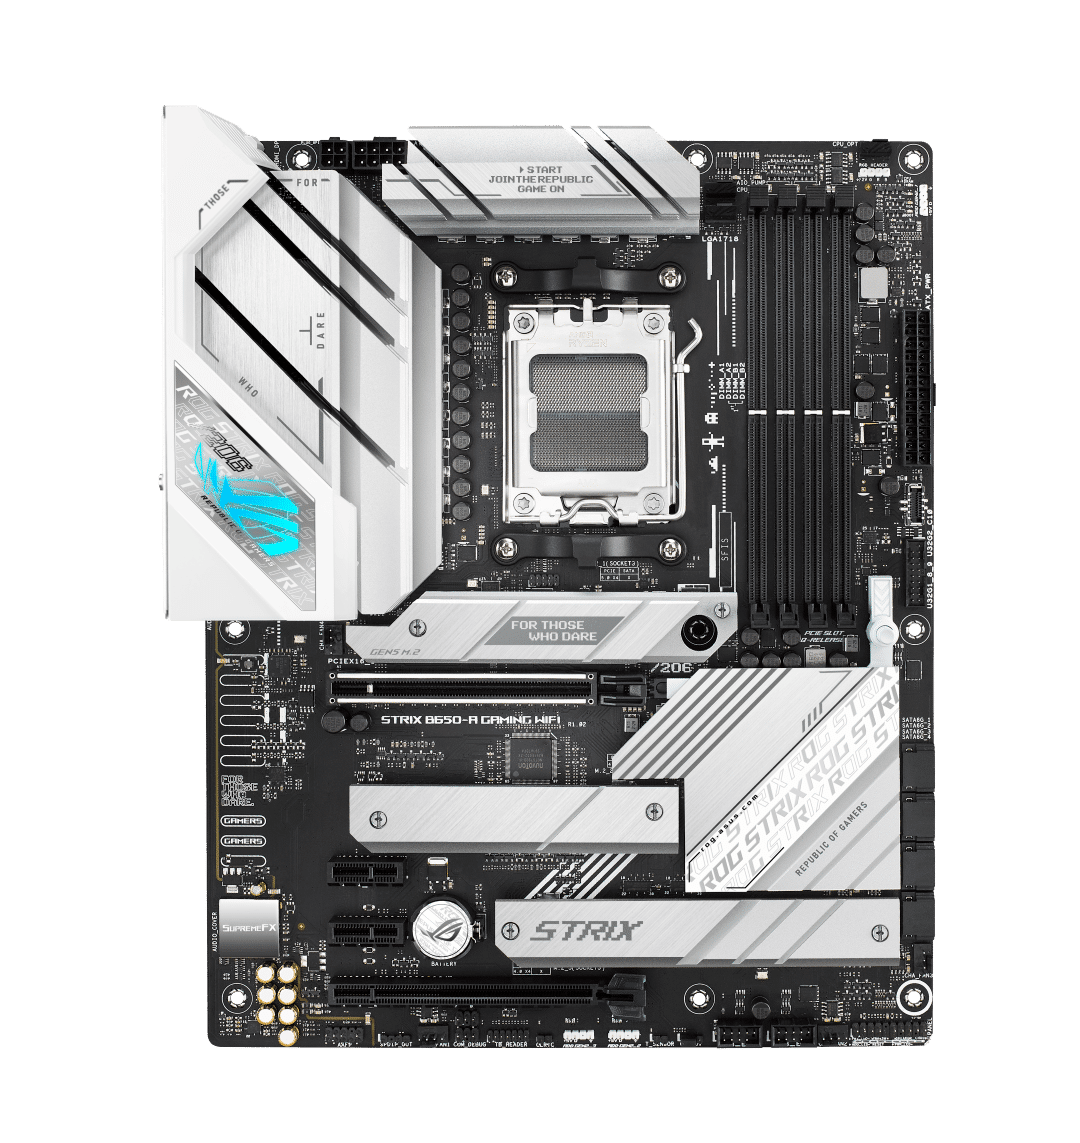 ASUS Introduces Four New AMD B650 Motherboard Series 26